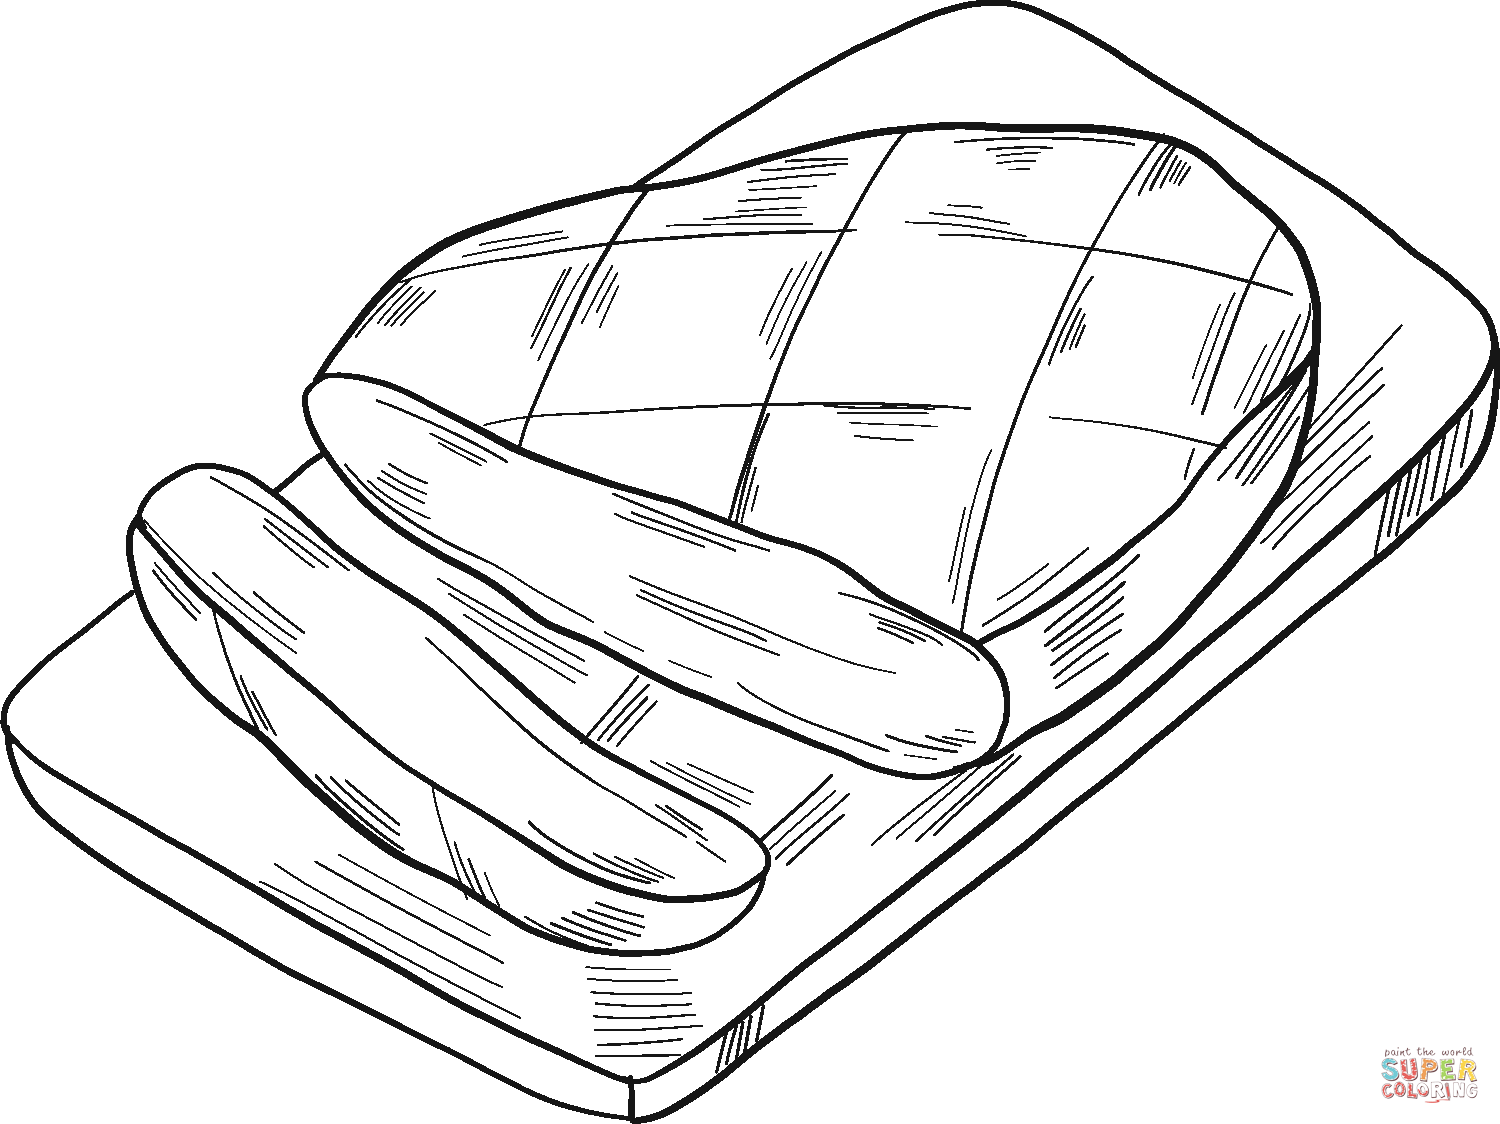 Steak coloring page | Free Printable Coloring Pages